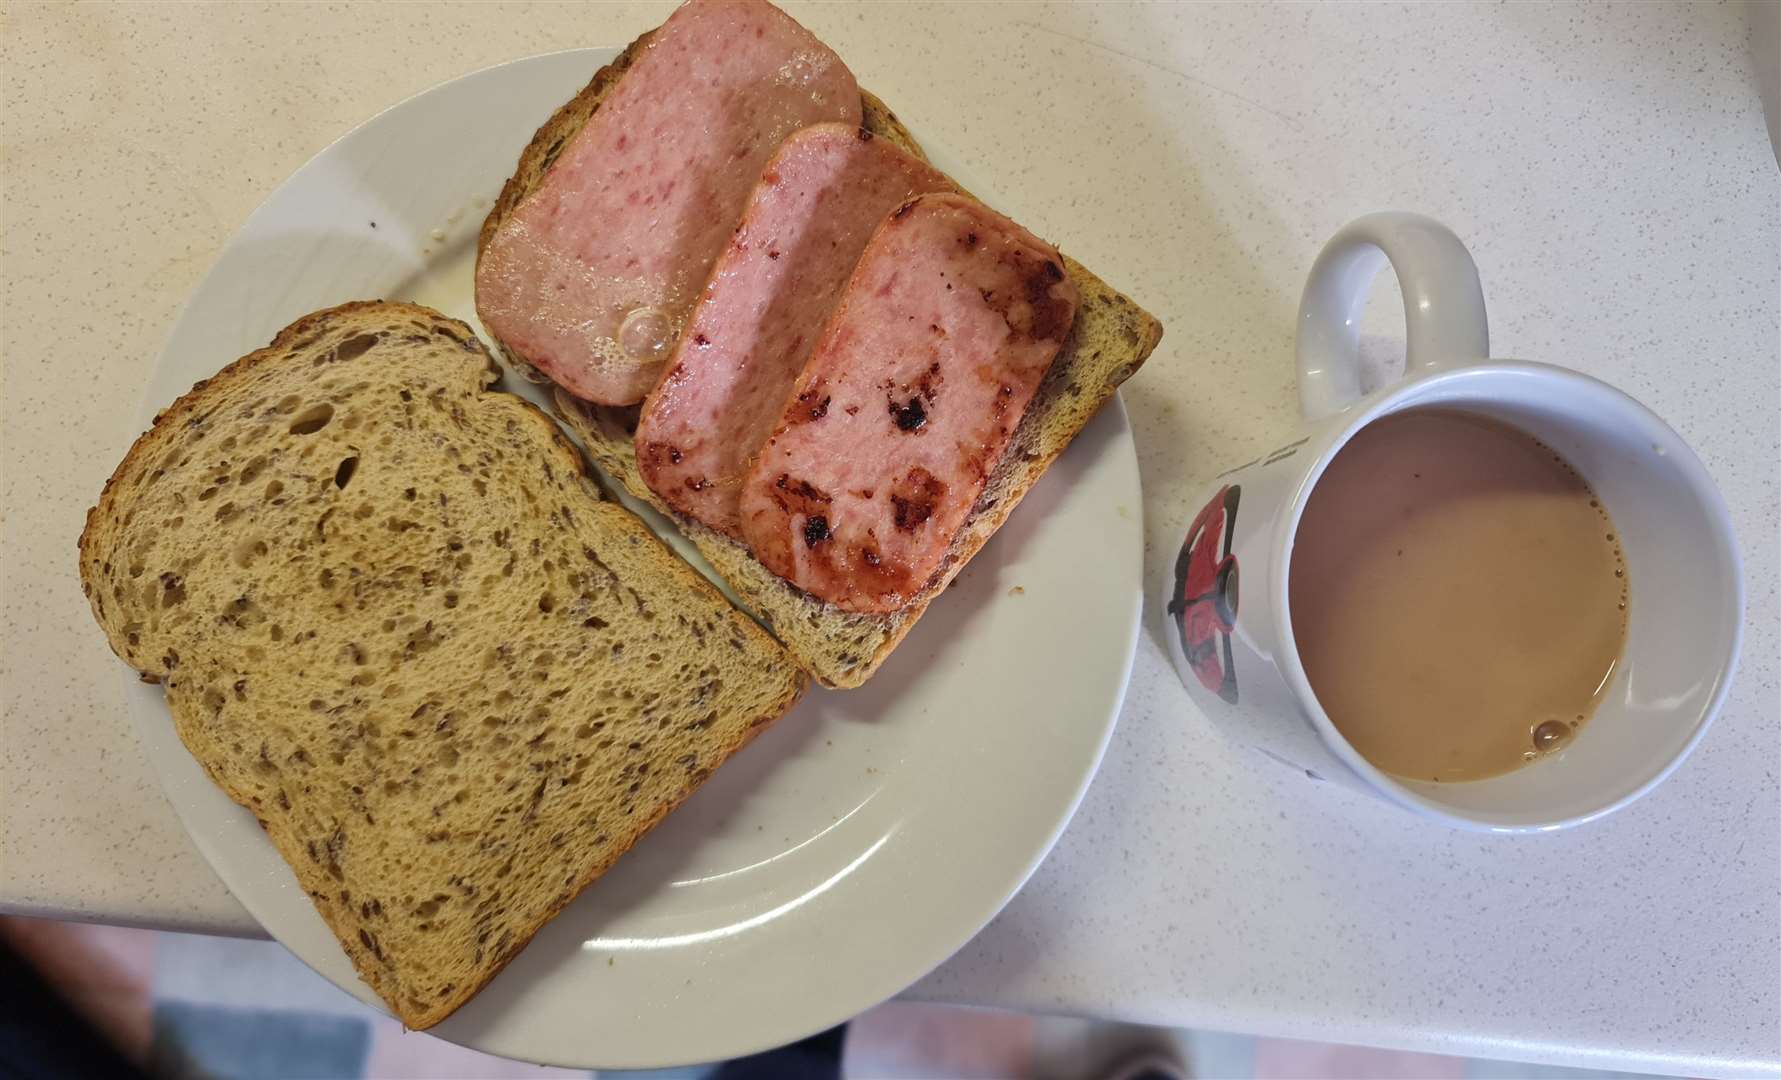 A Spam sandwich and a cup of tea